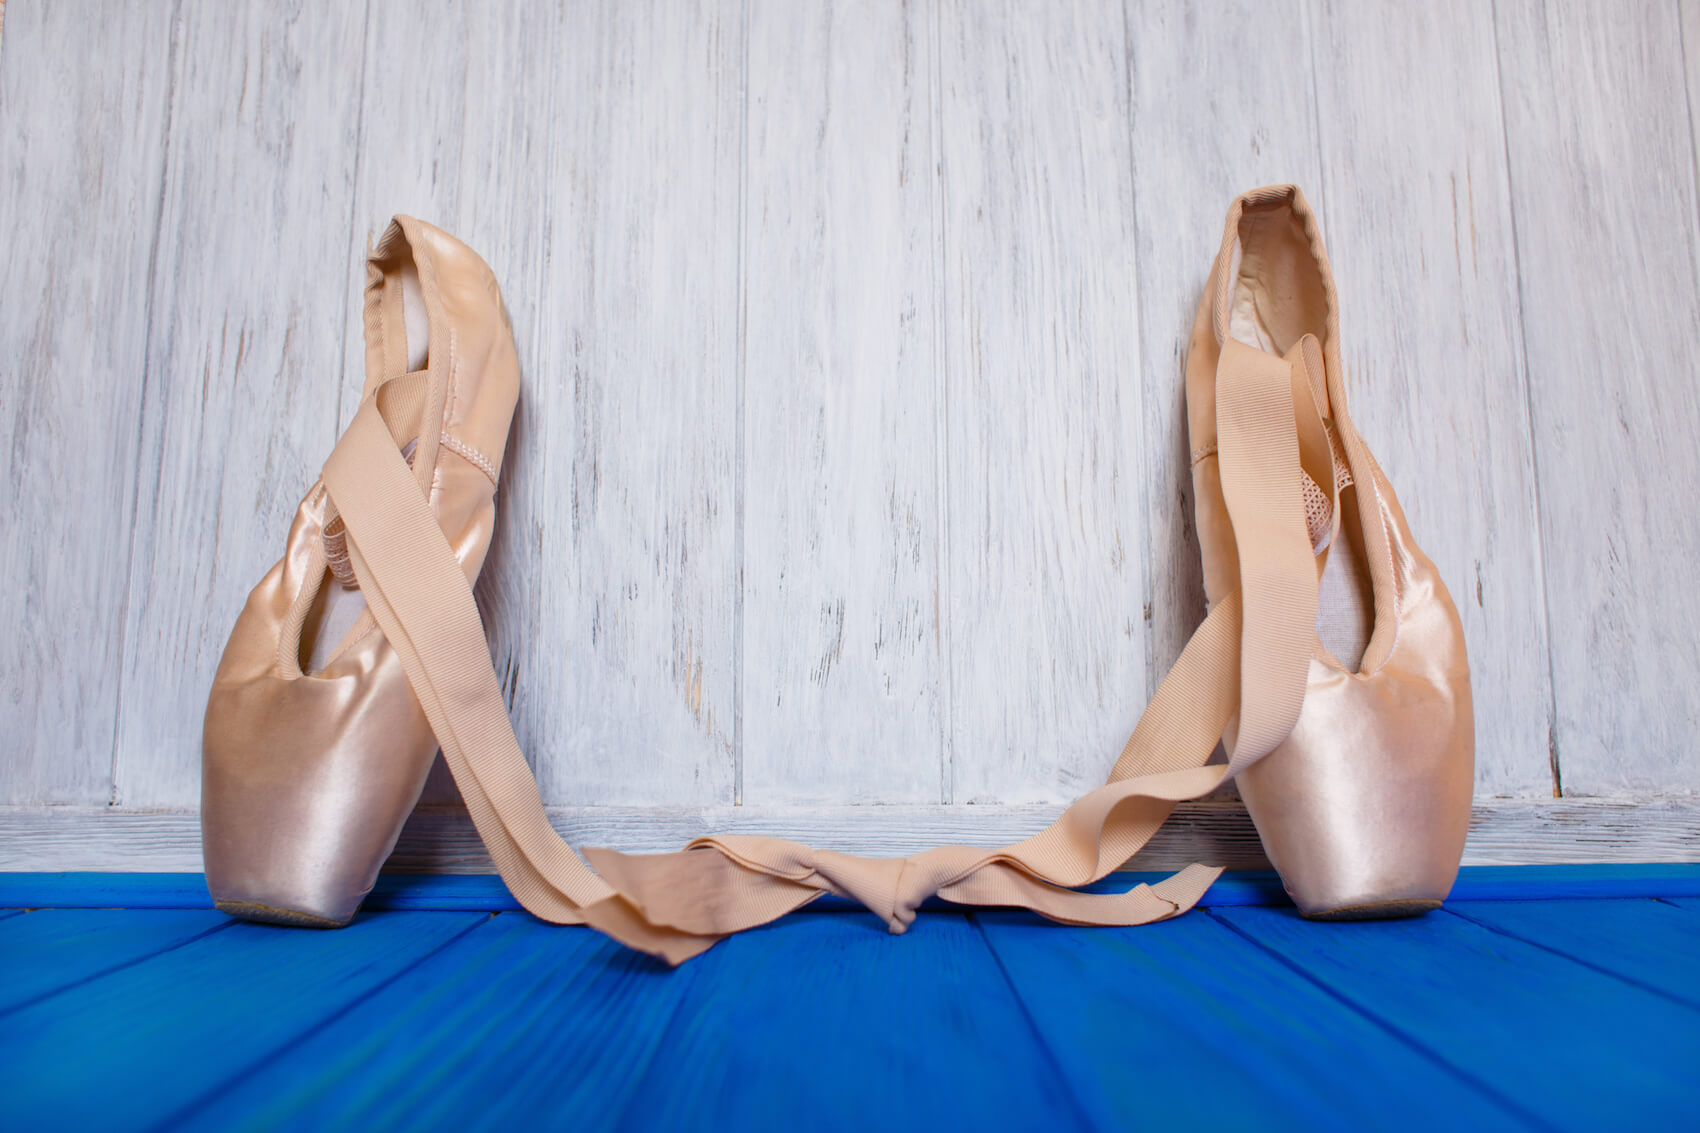 sewing pointe shoe ribbons and elastics